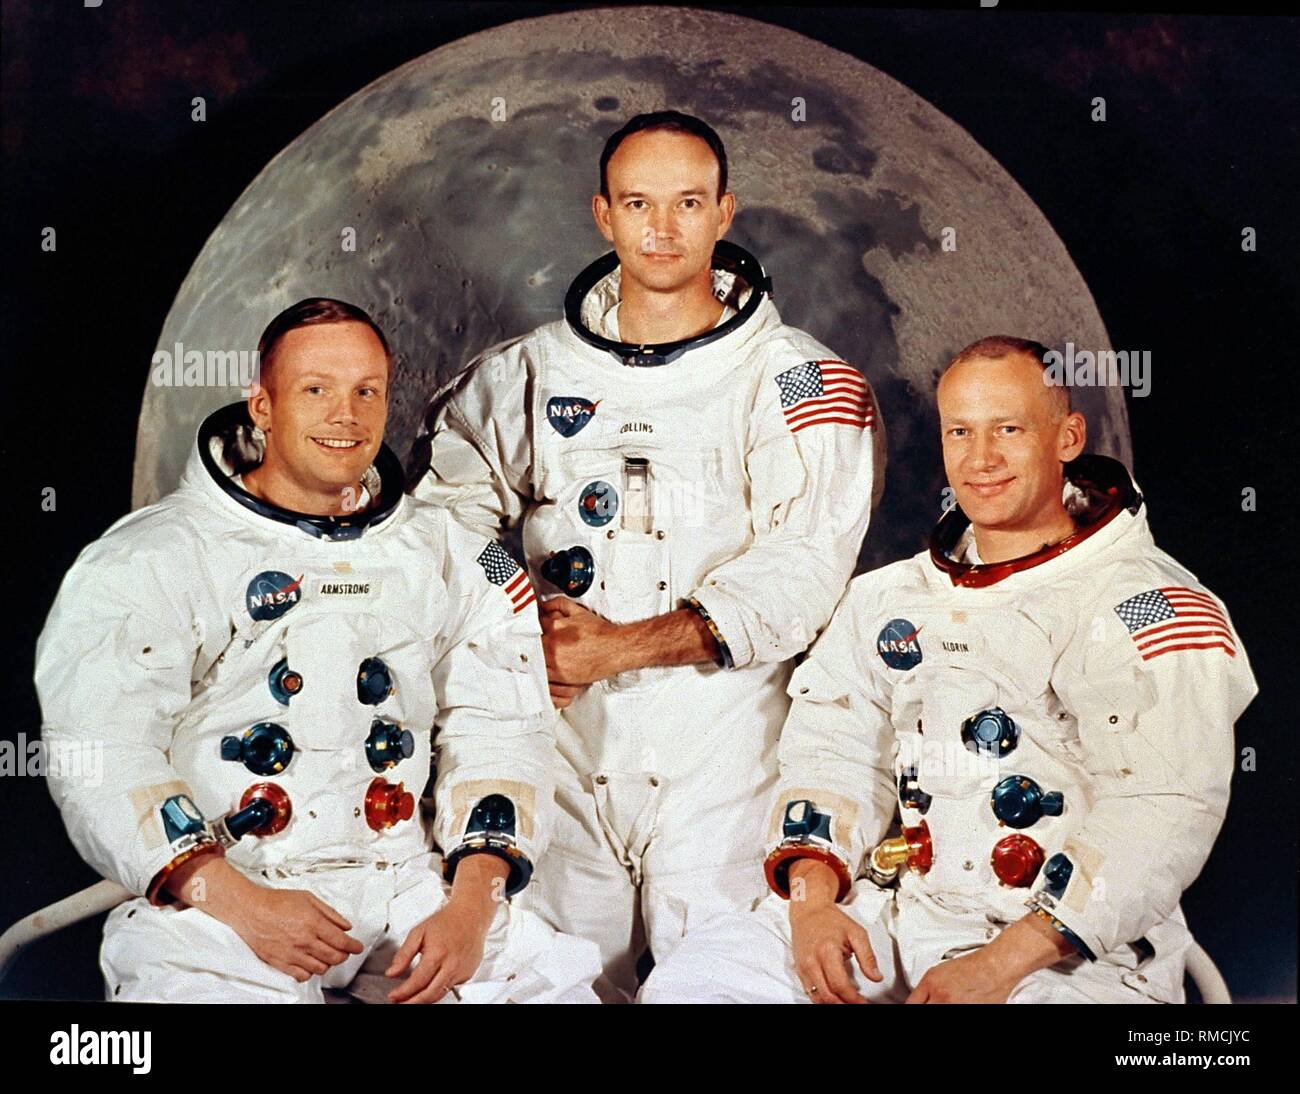 The crew of the Apollo 11 mission: Niel A. Armstrong, Michael Collins and Edwin 'Buzz' Aldrin (from left to right ). Apollo 11 was the first manned Moon landing mission, making it the most significant space mission for humanity. Stock Photo